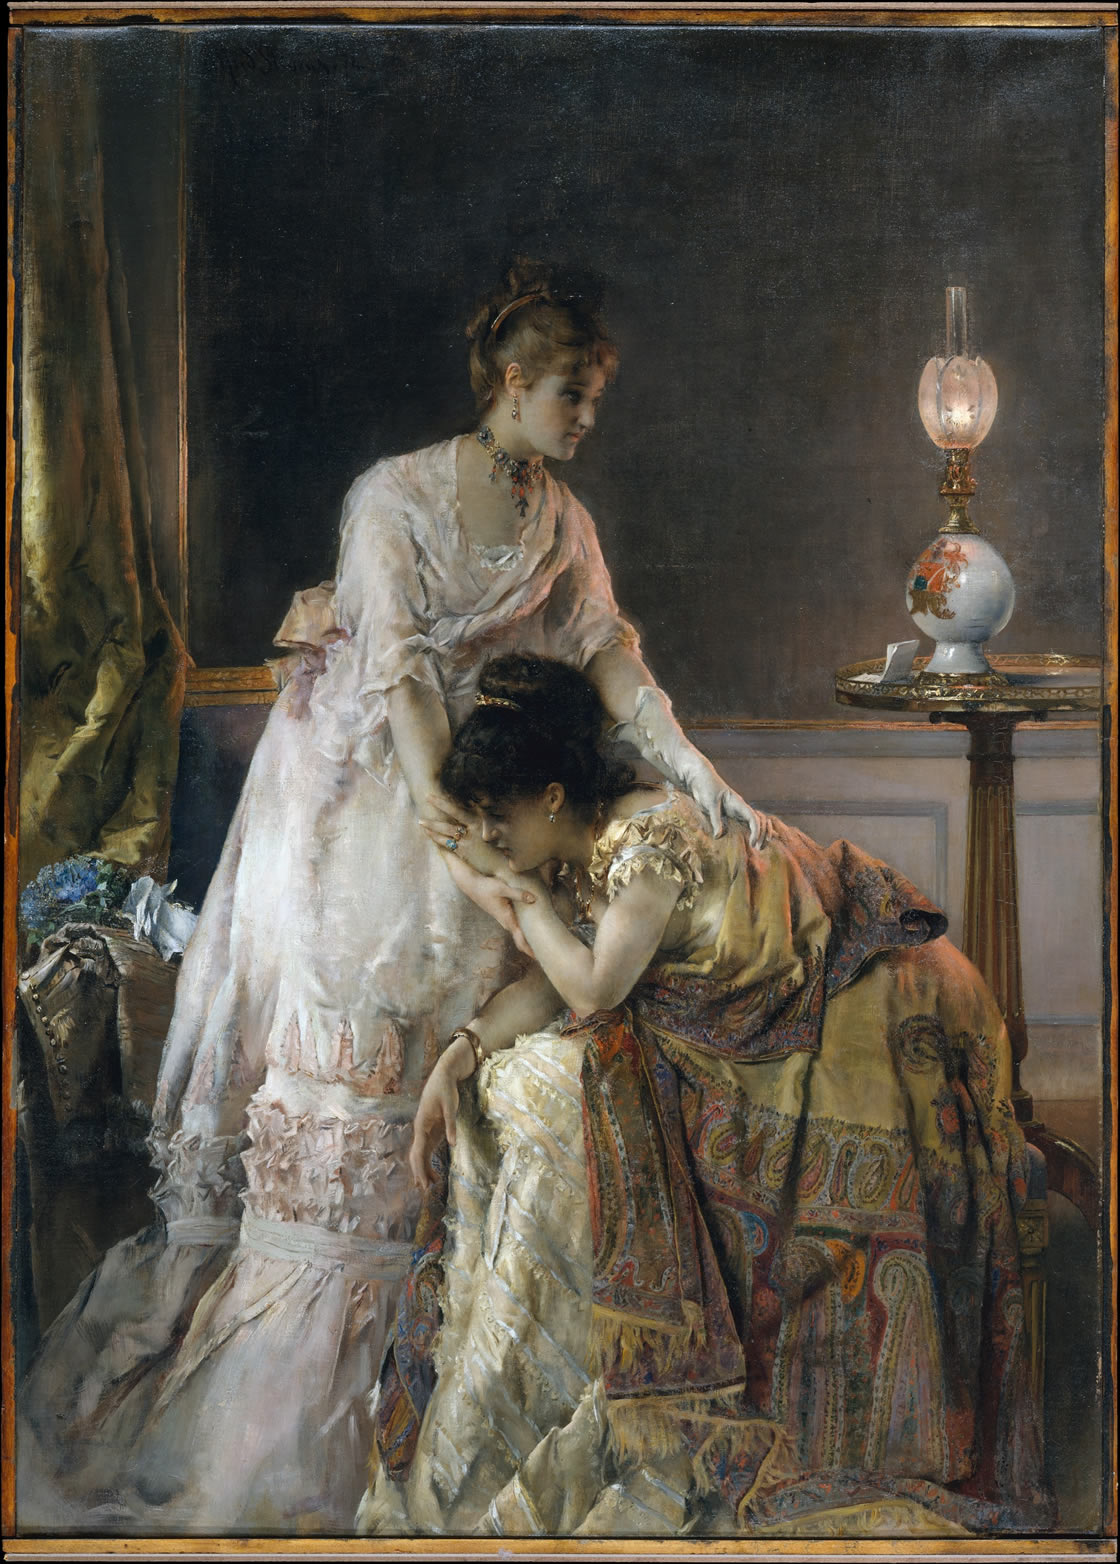 After the Ball, by Alfred Stevens, 1874